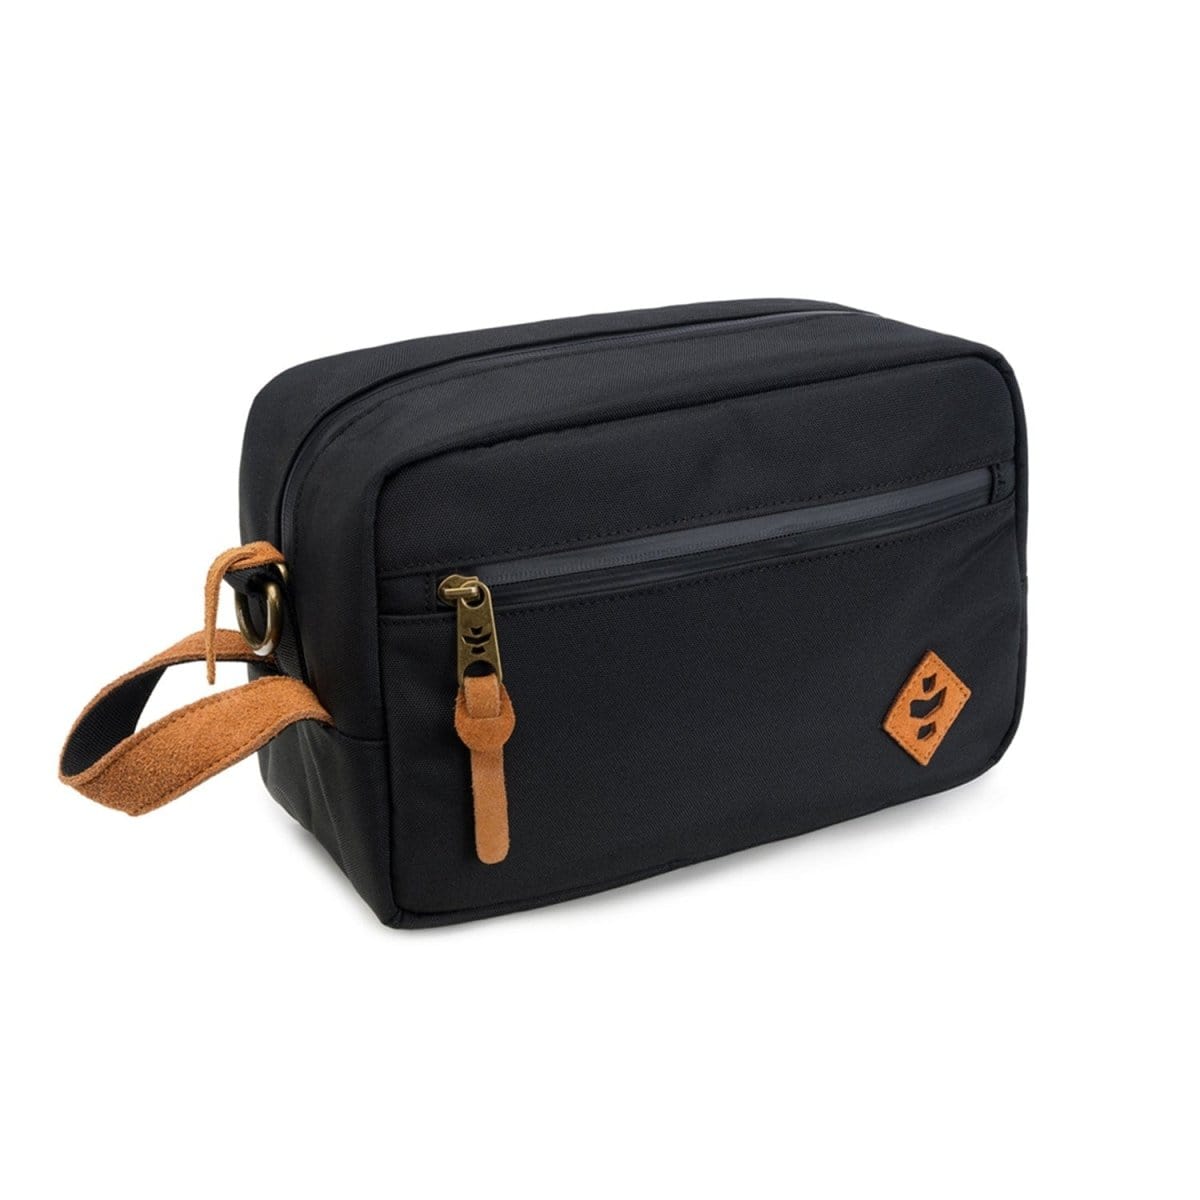 Revelry Supply Travel Bag Black The Stowaway - Smell Proof Toiletry Kit